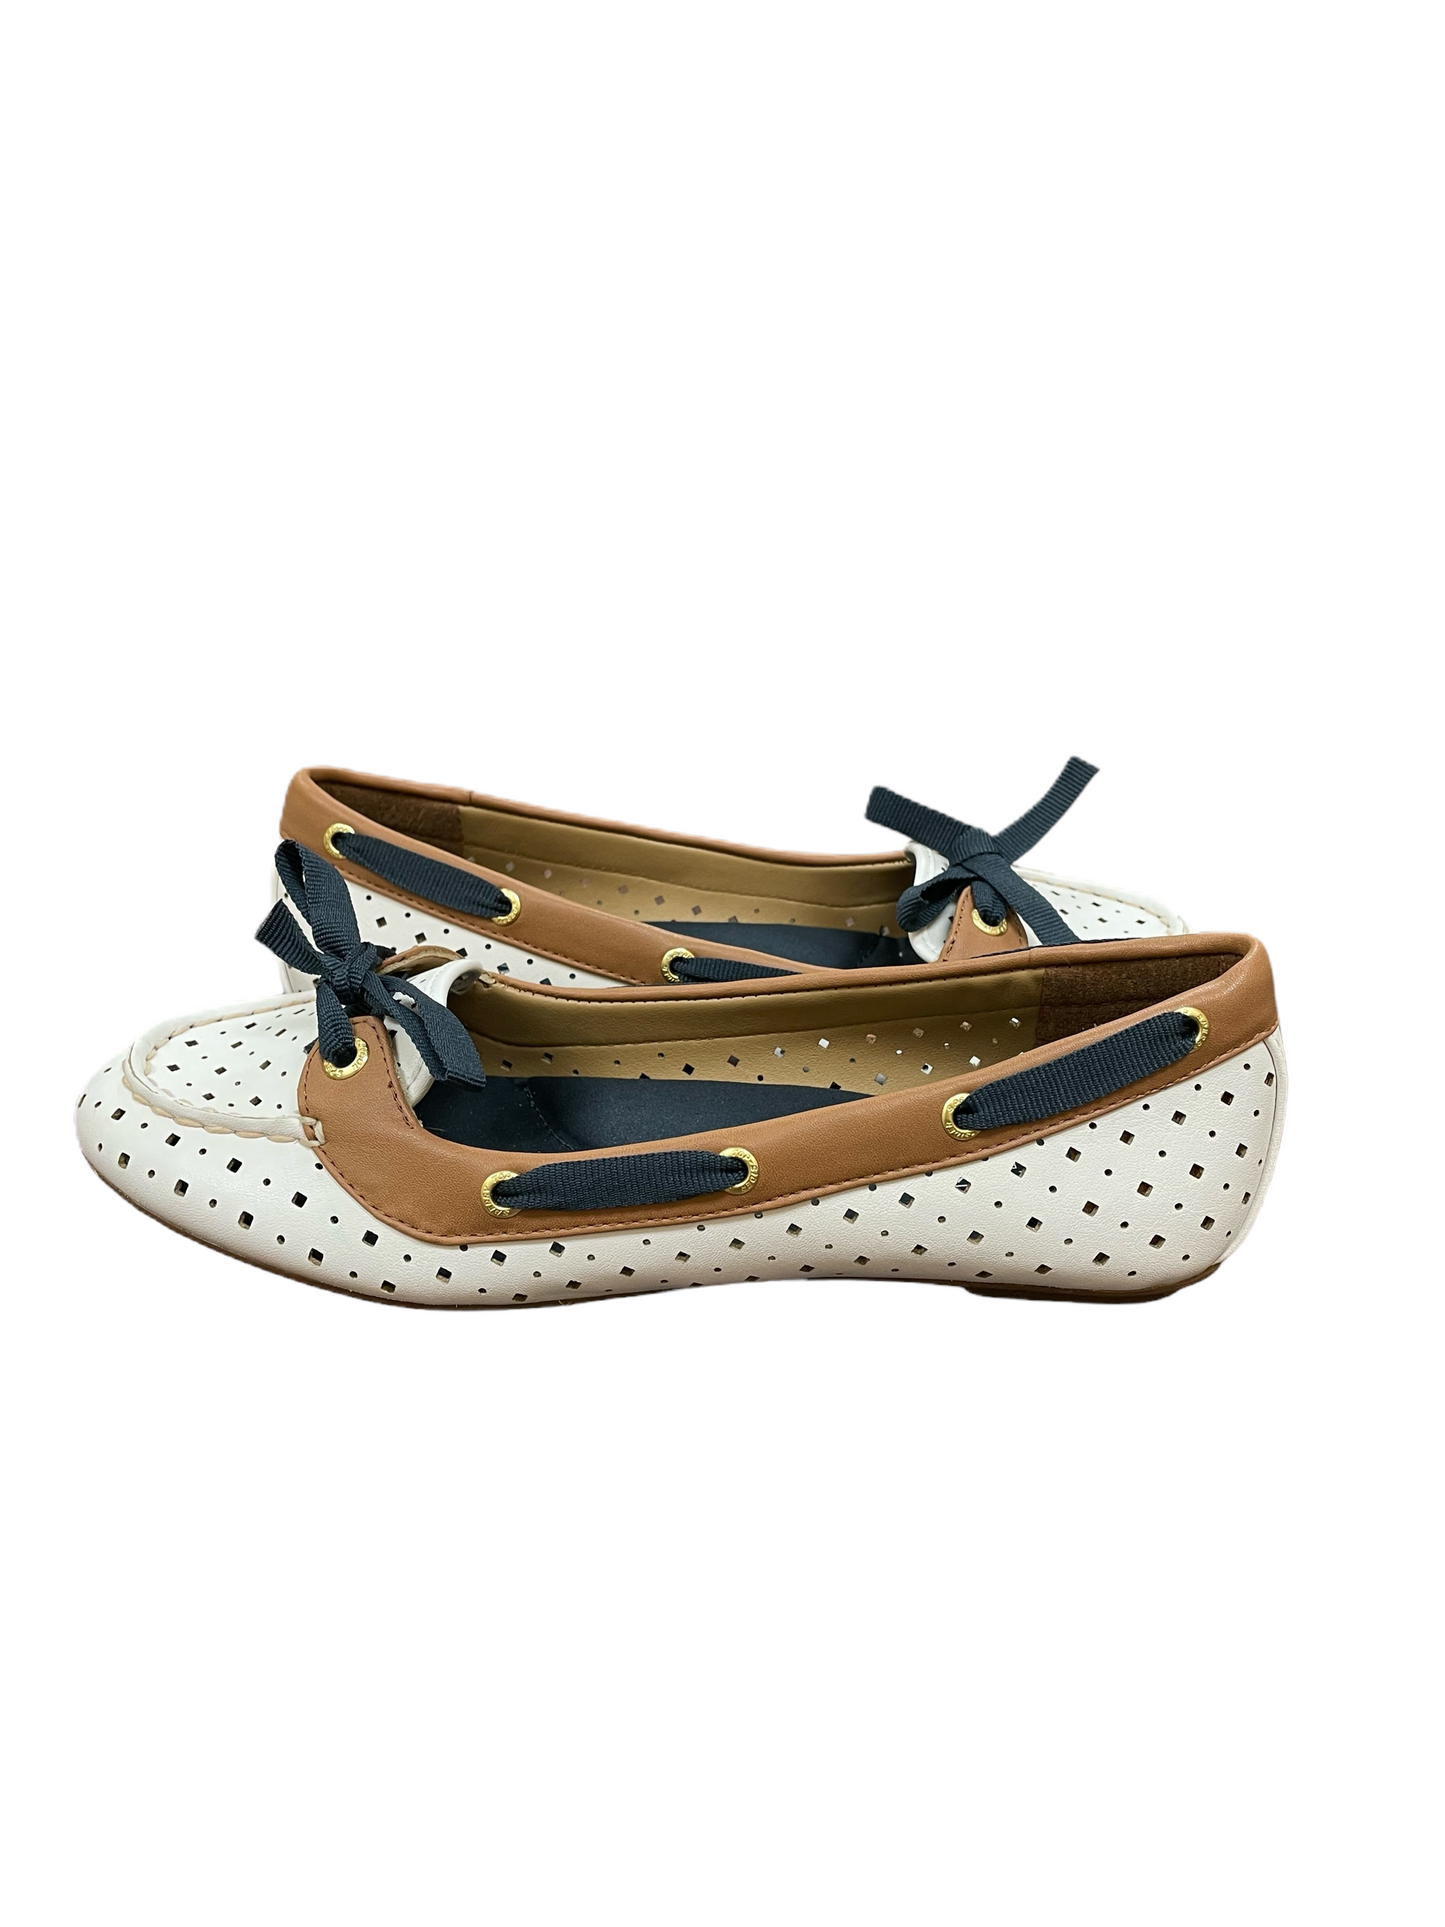 White Shoes Flats By Sperry, Size: 7.5